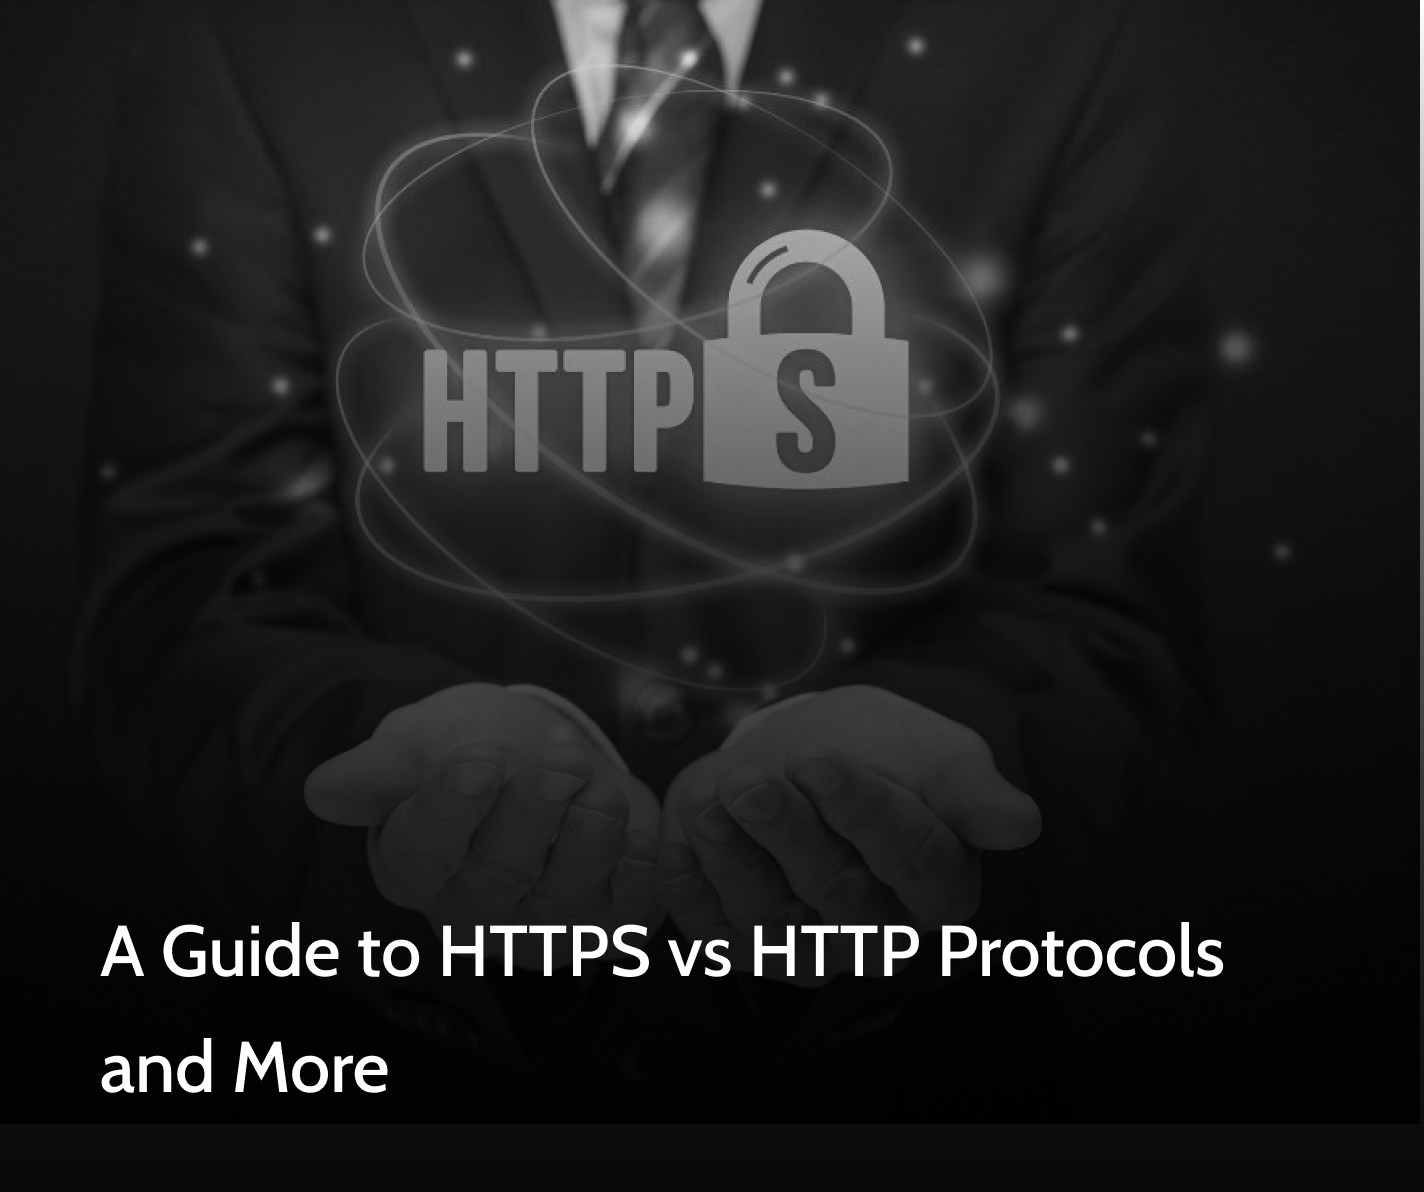 A Guide to HTTPS vs HTTP Protocols and More